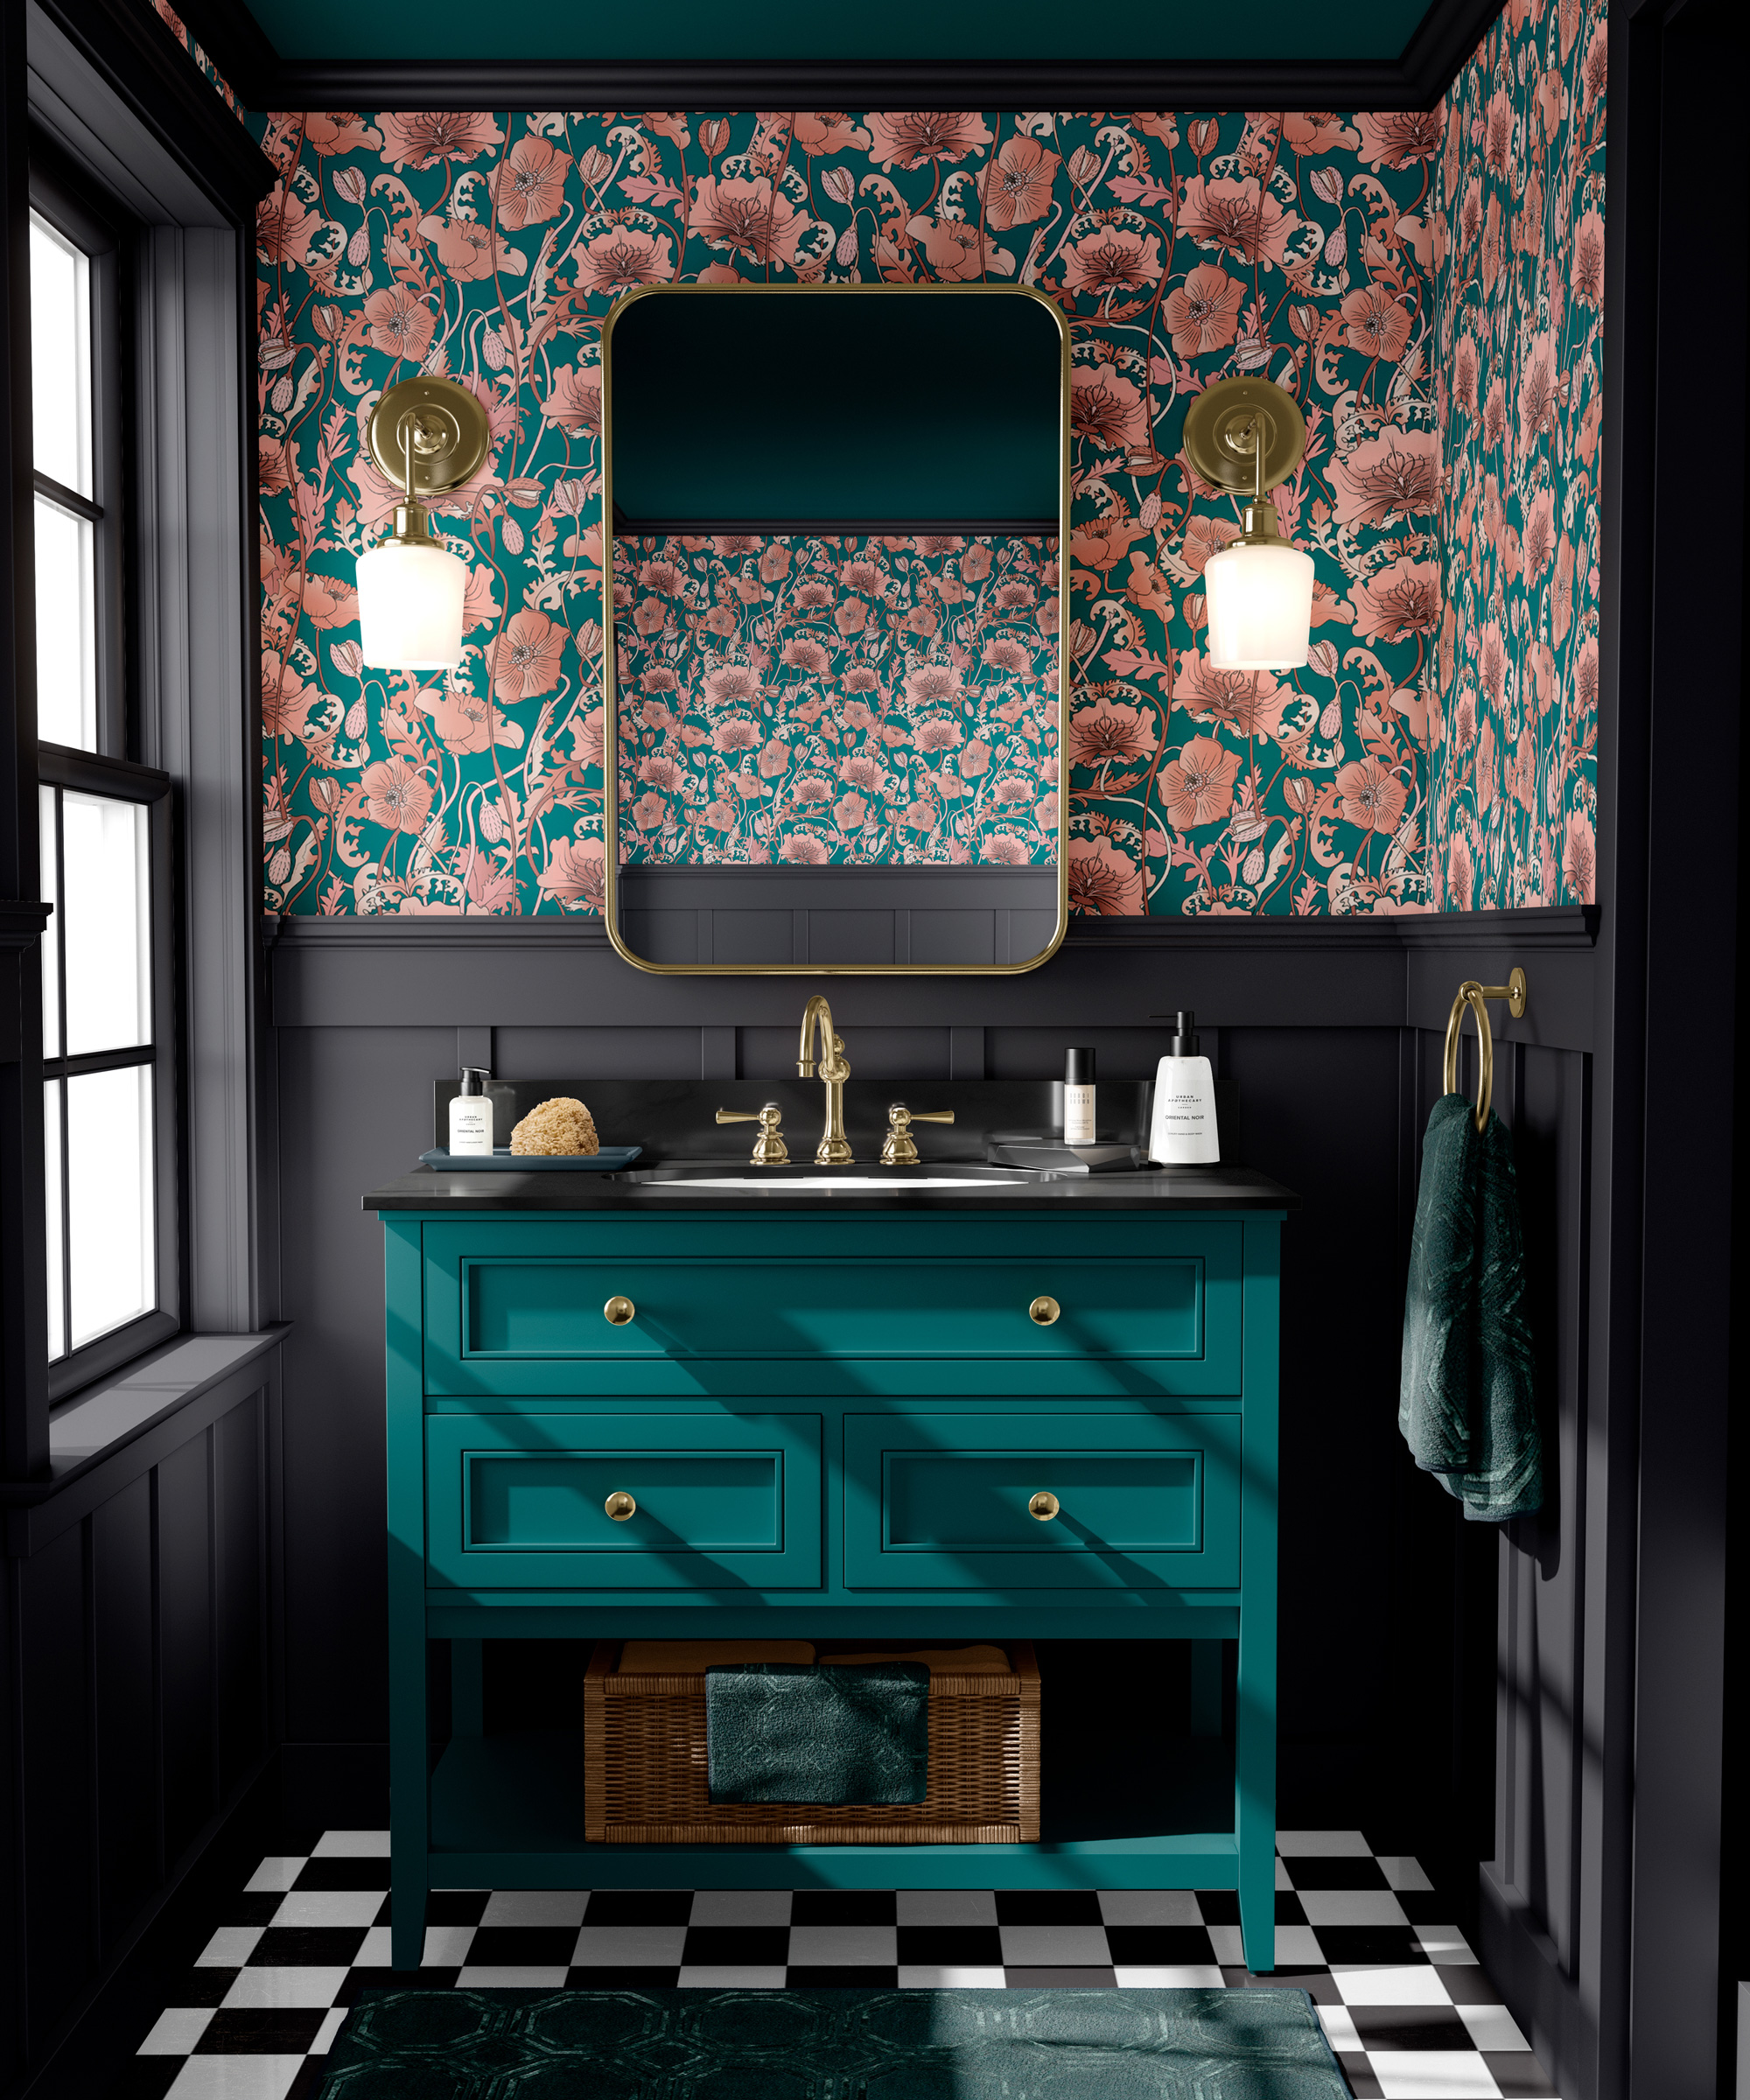 How to use the dark bathroom trend in your home, according to interior ...